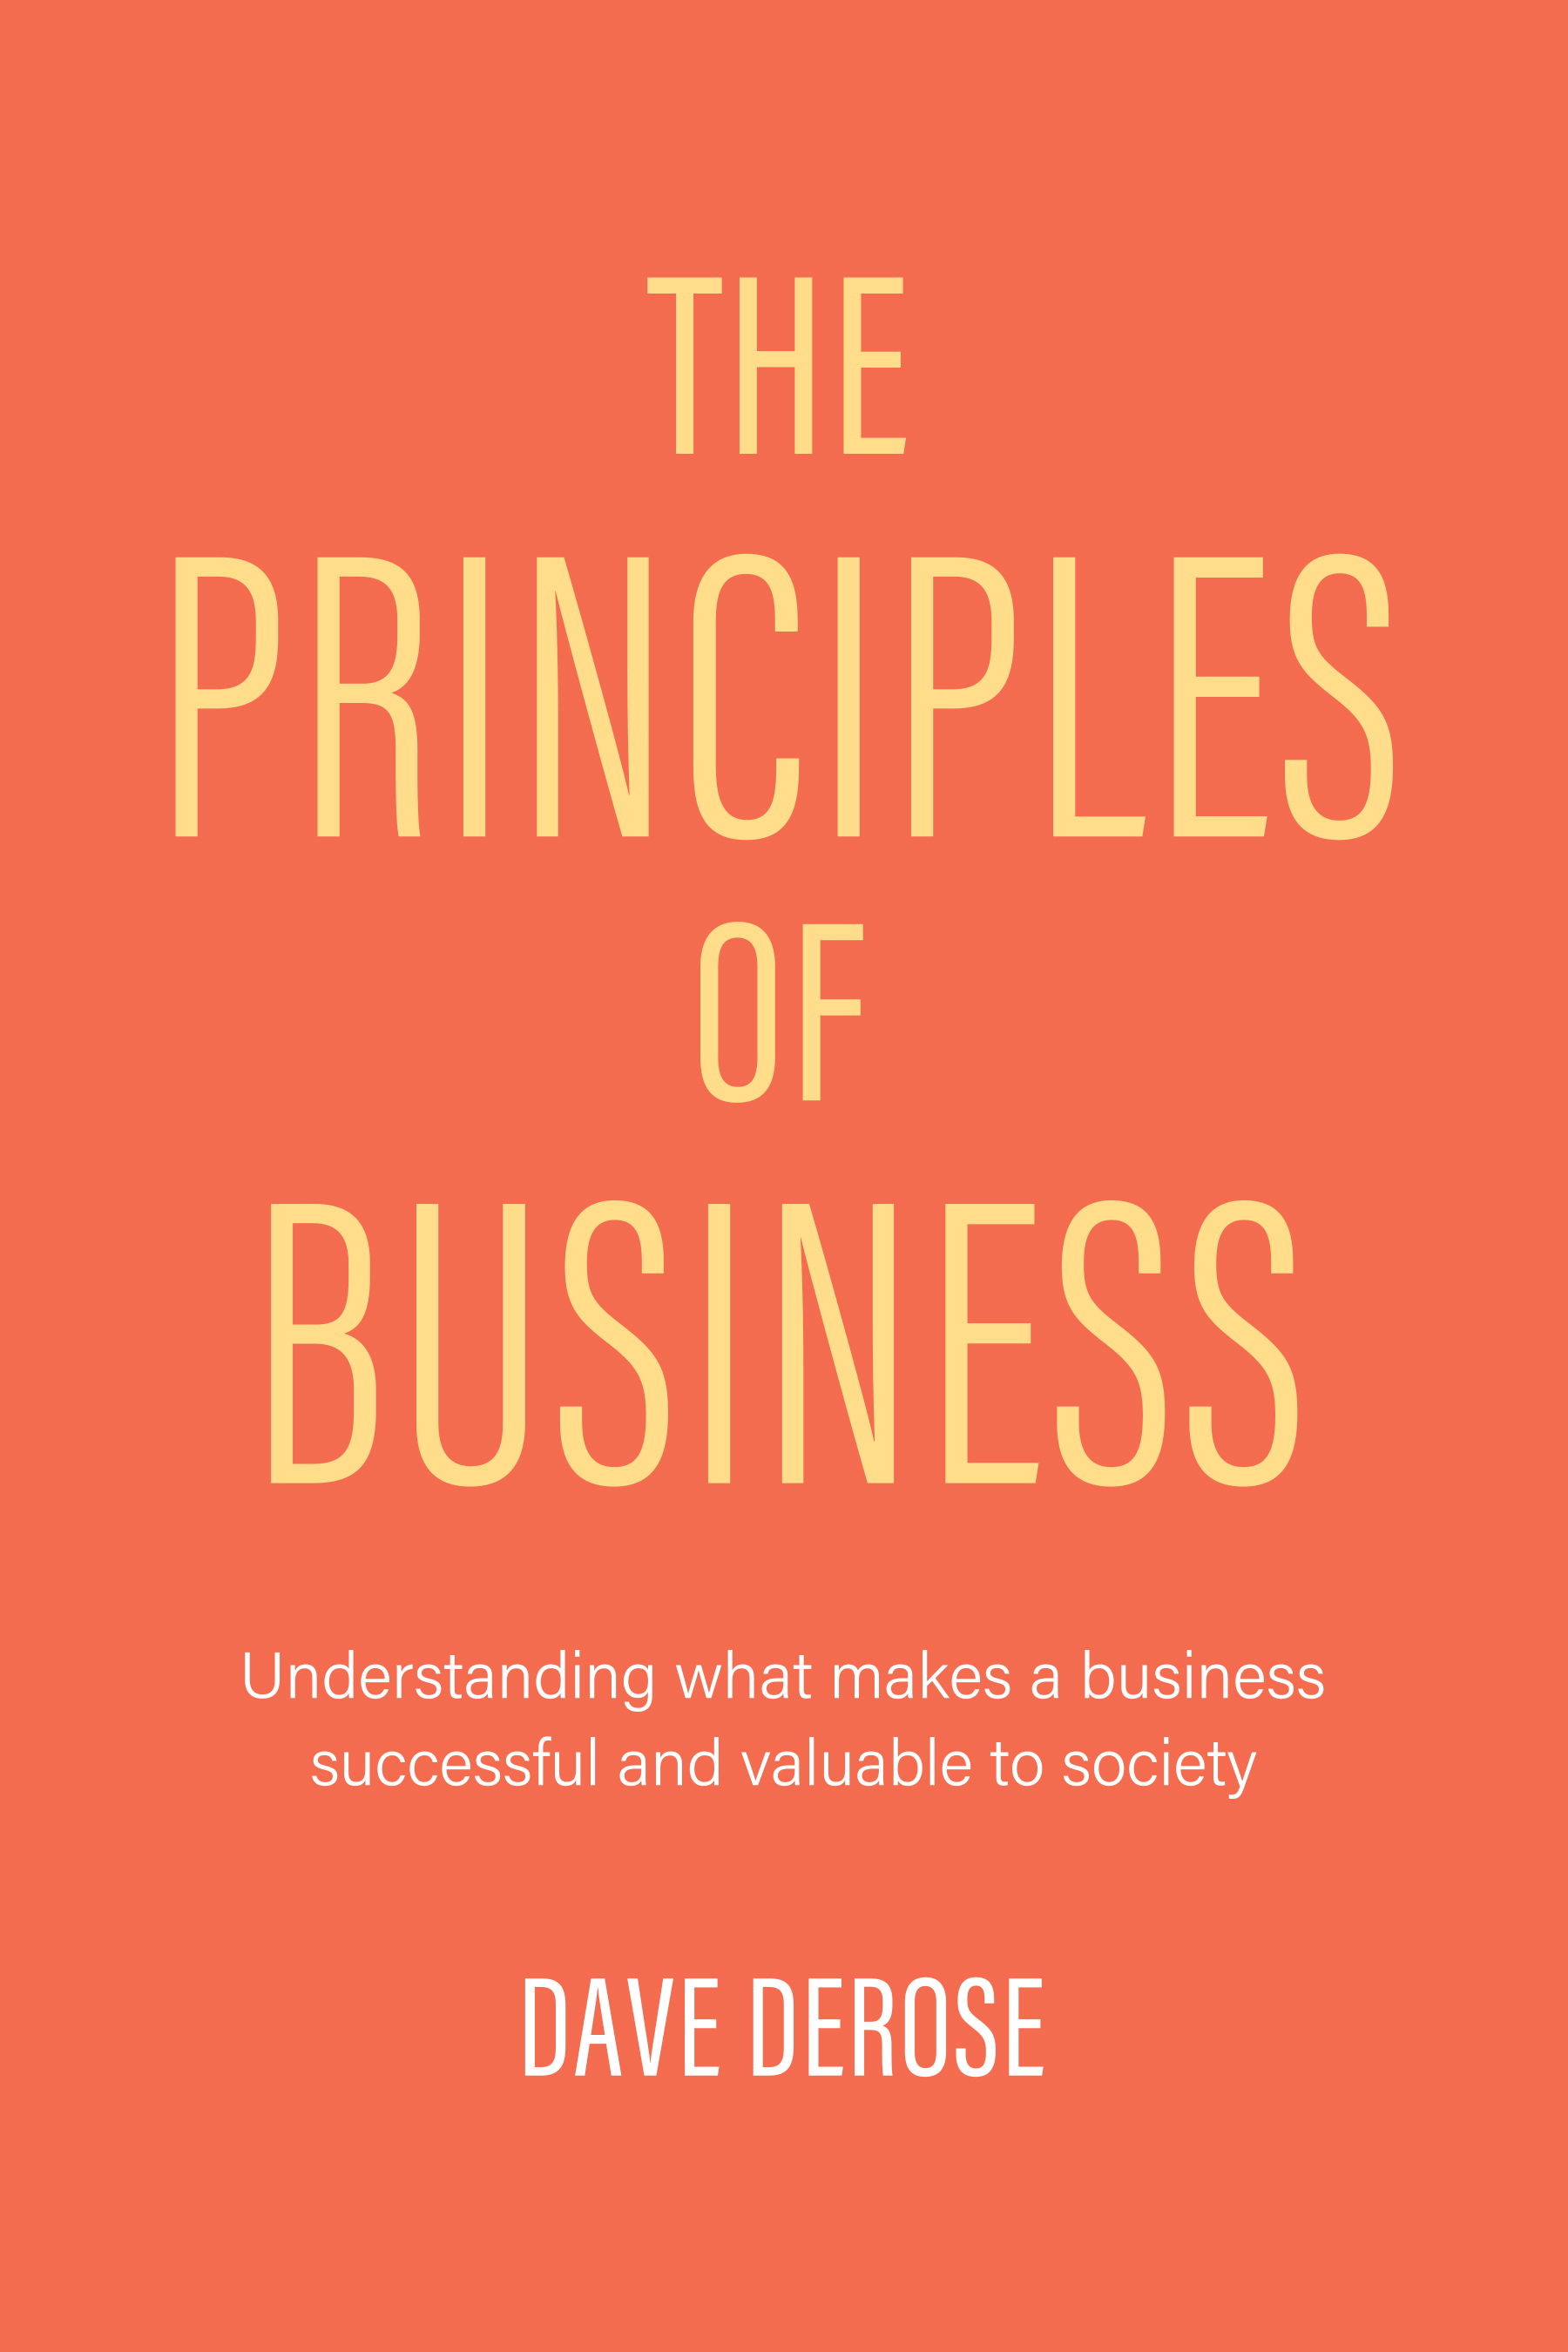 Cover of "The Principles of Business" by Dave DeRose